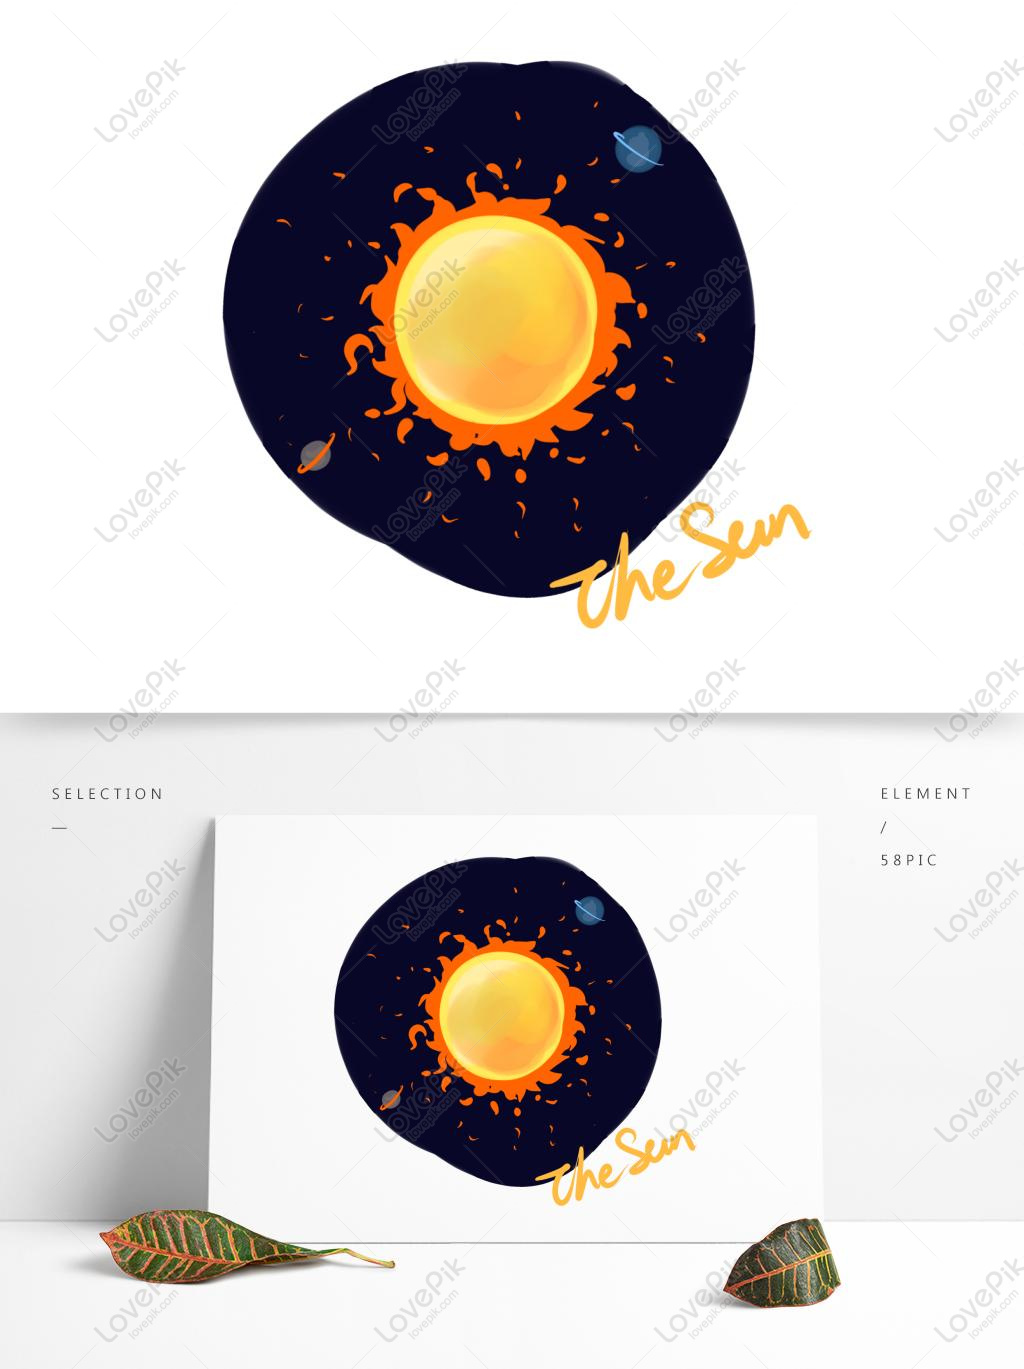 Sun And Moon Star Sun Decoration Picture Commercial Elements Free PNG ...